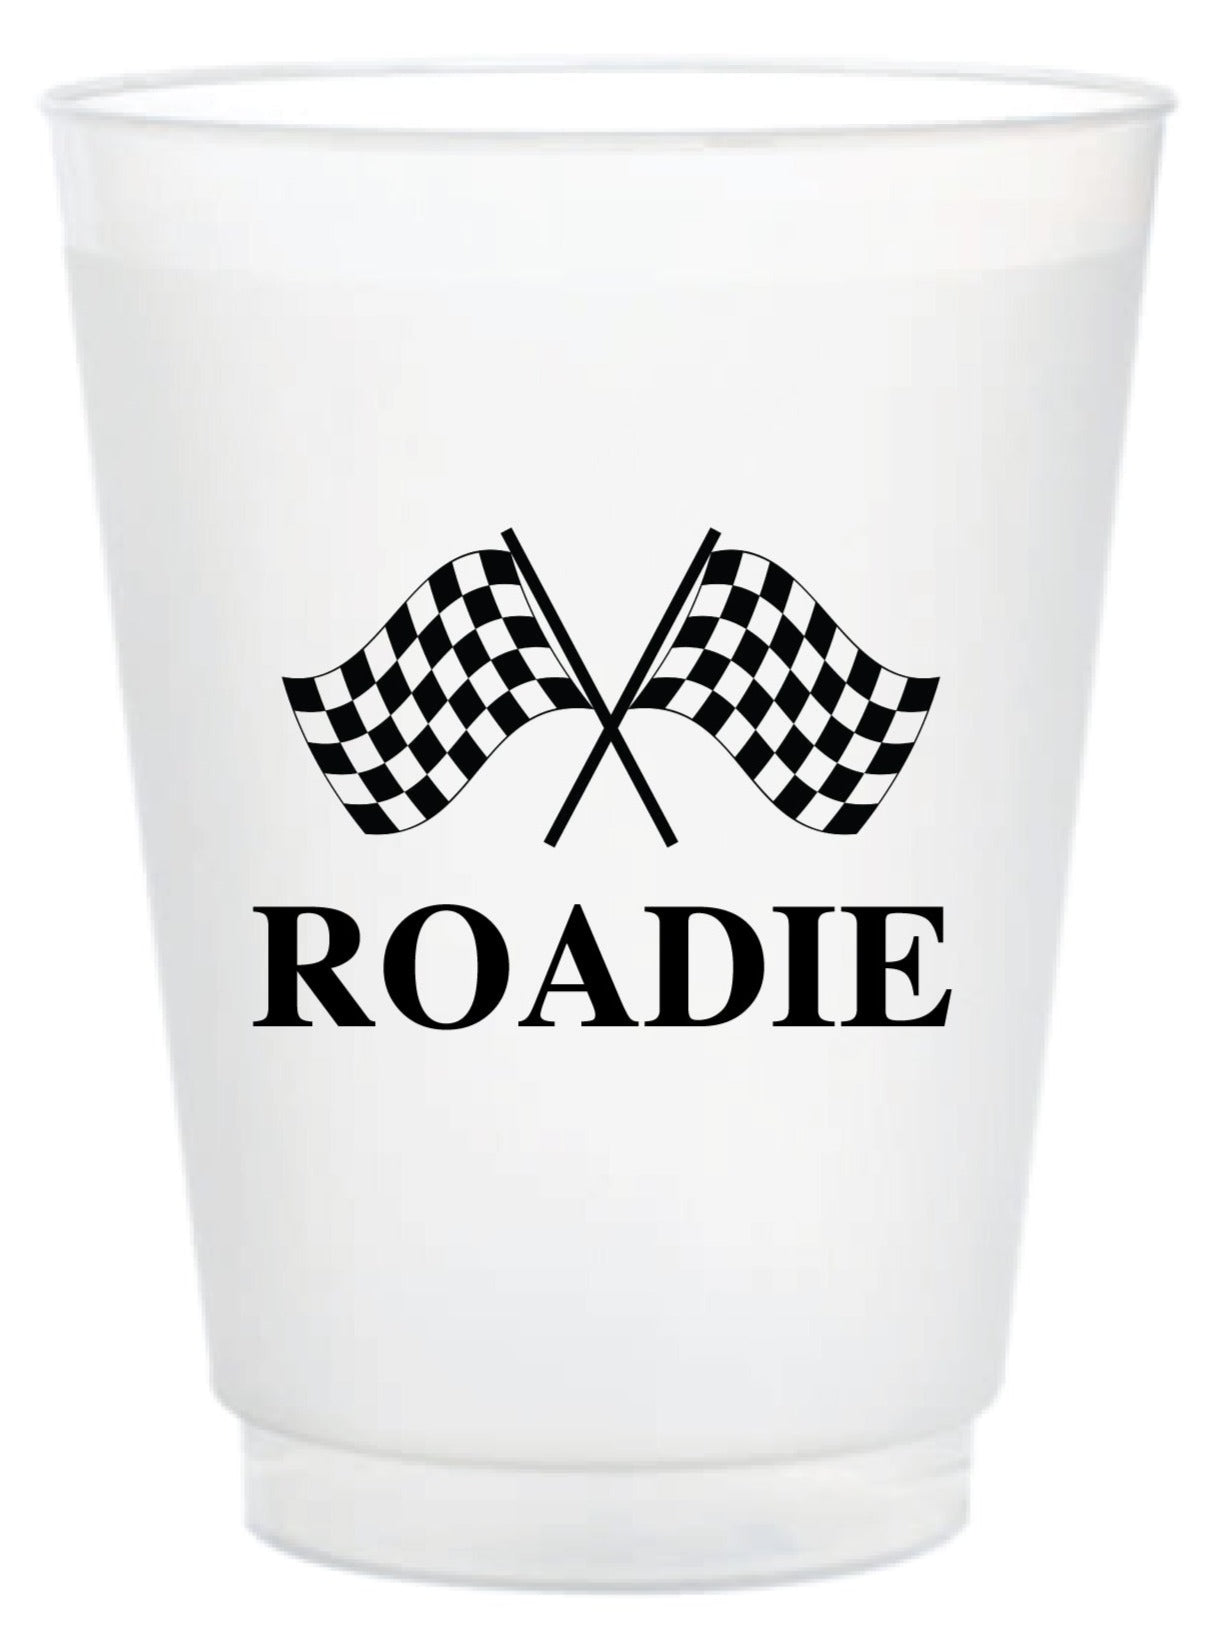 Frosted Cup - Racetrack, Nascar, Finish Line Roadie